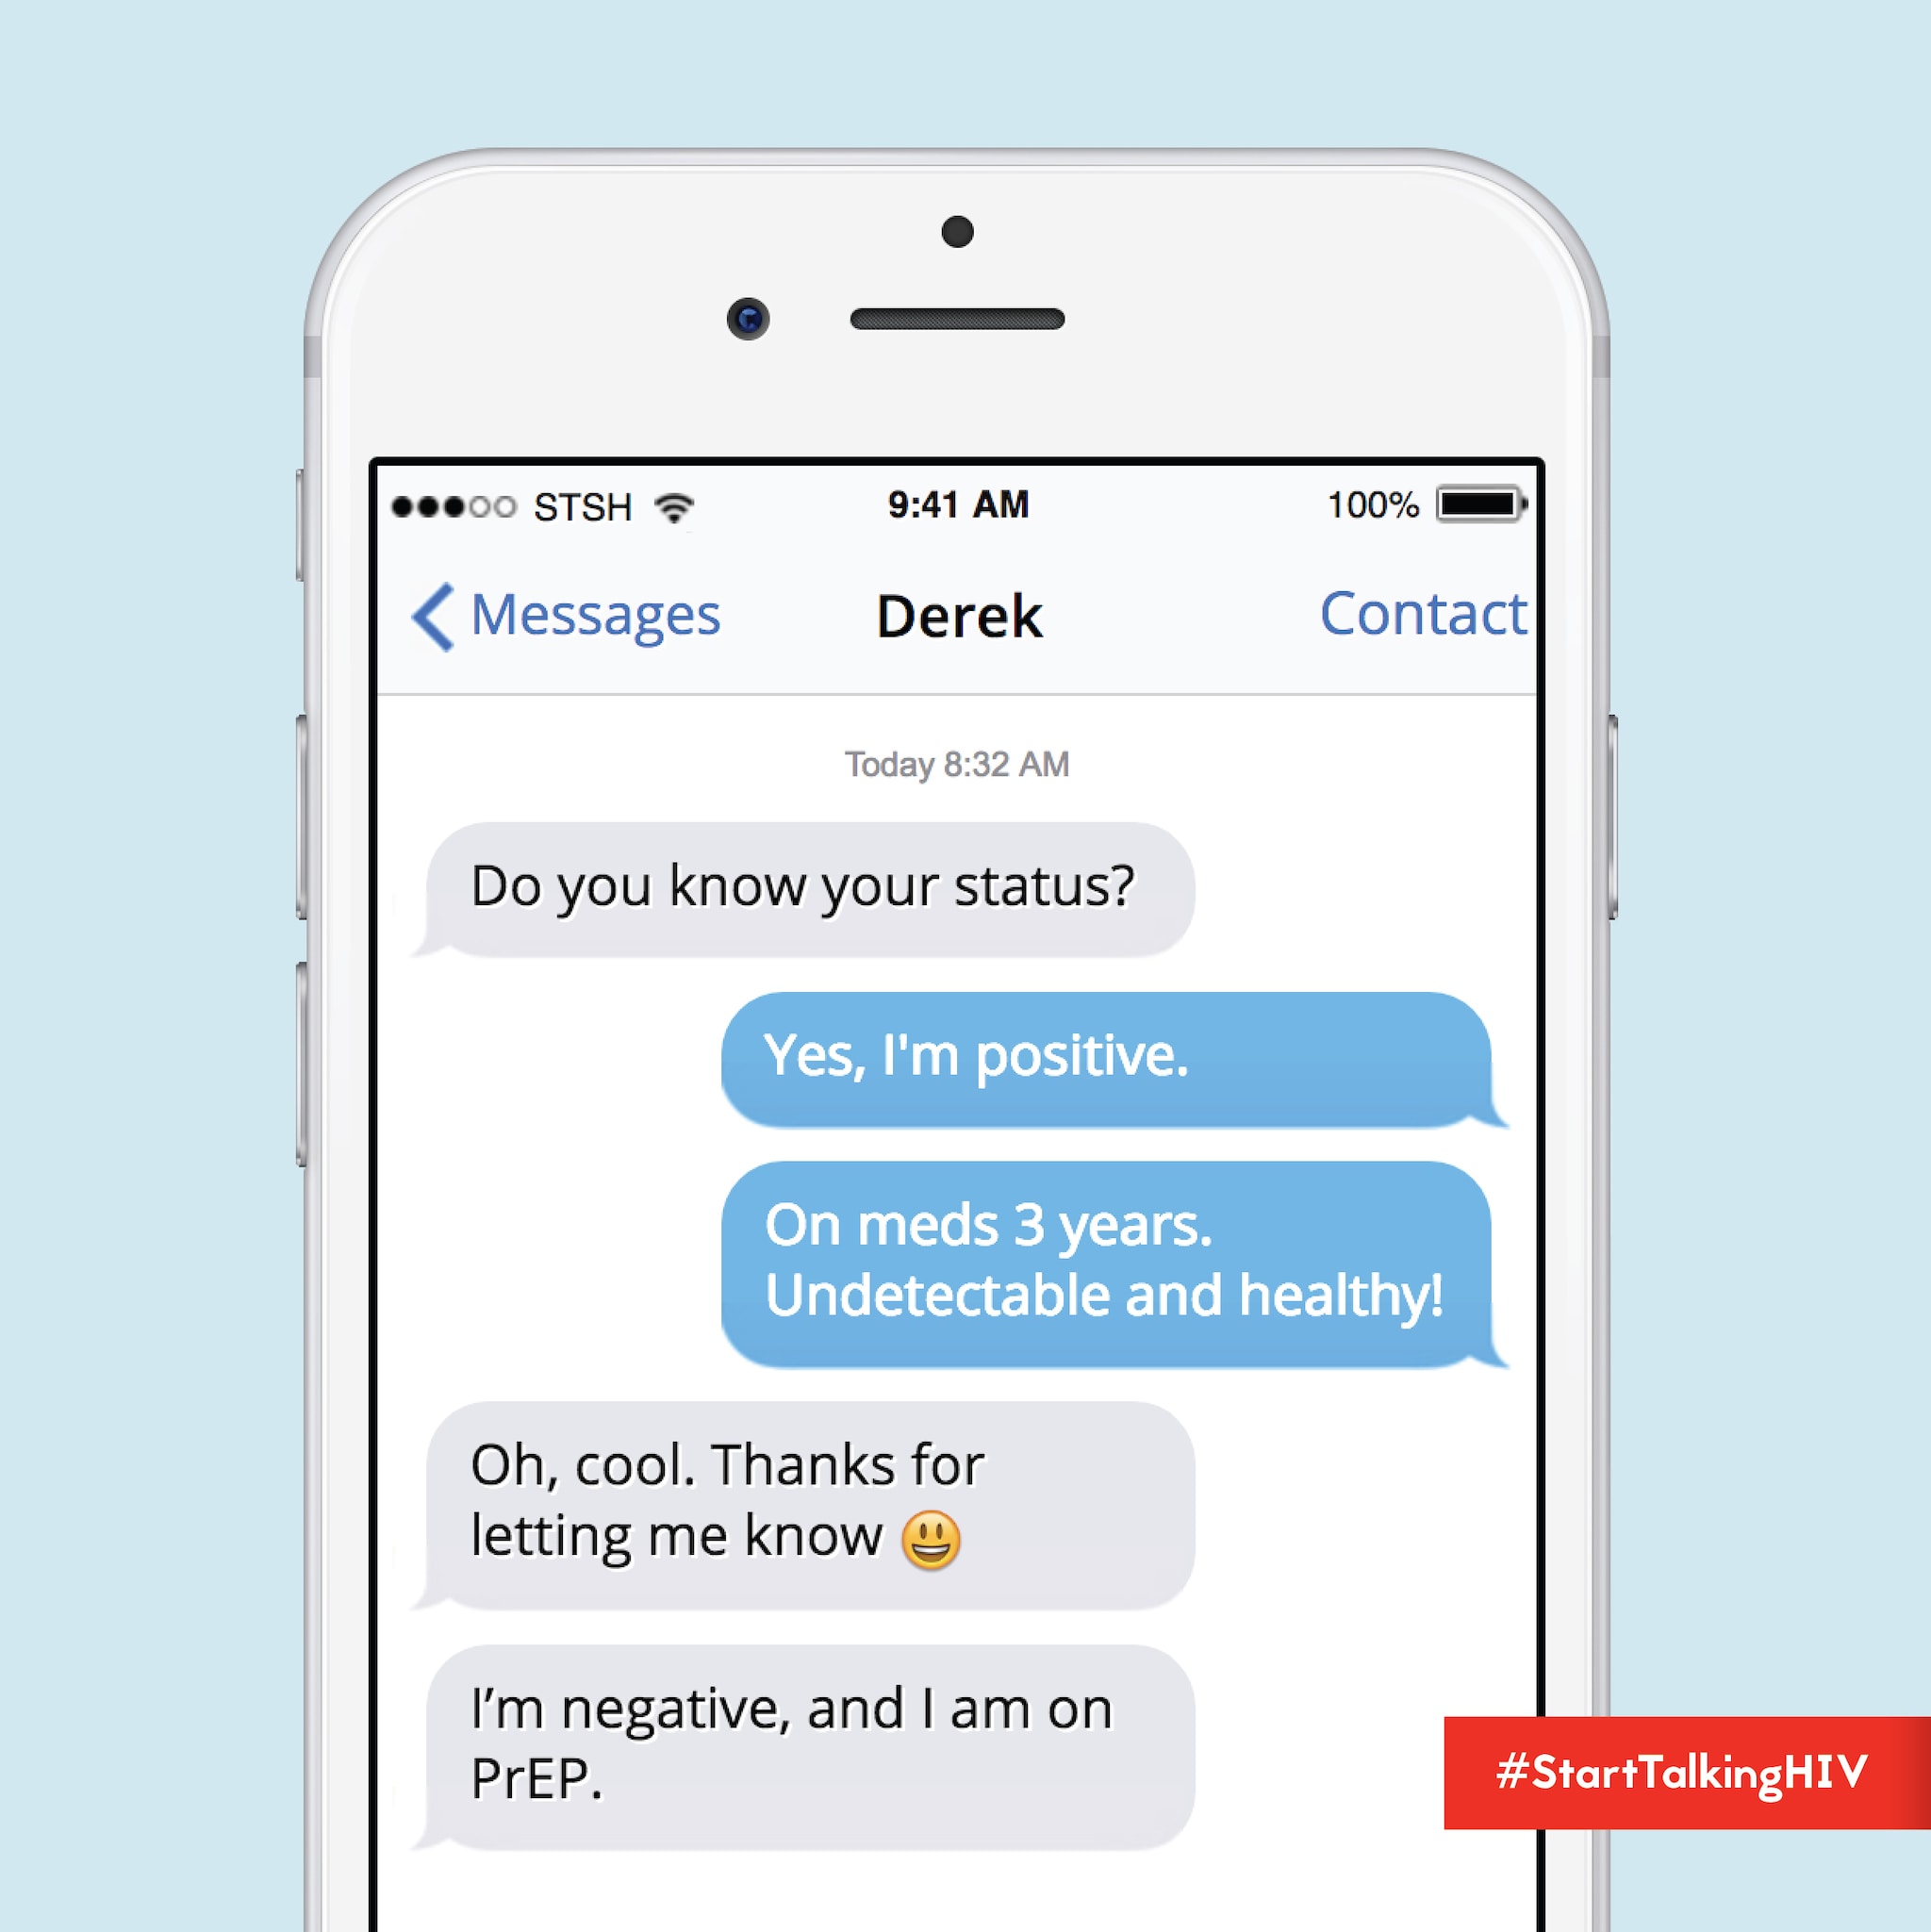 Image displays a cell phone screen that depicts a text conversation between two individuals disclosing their HIS status to each other (one positive and undetectable; the other negative and on PrEP).